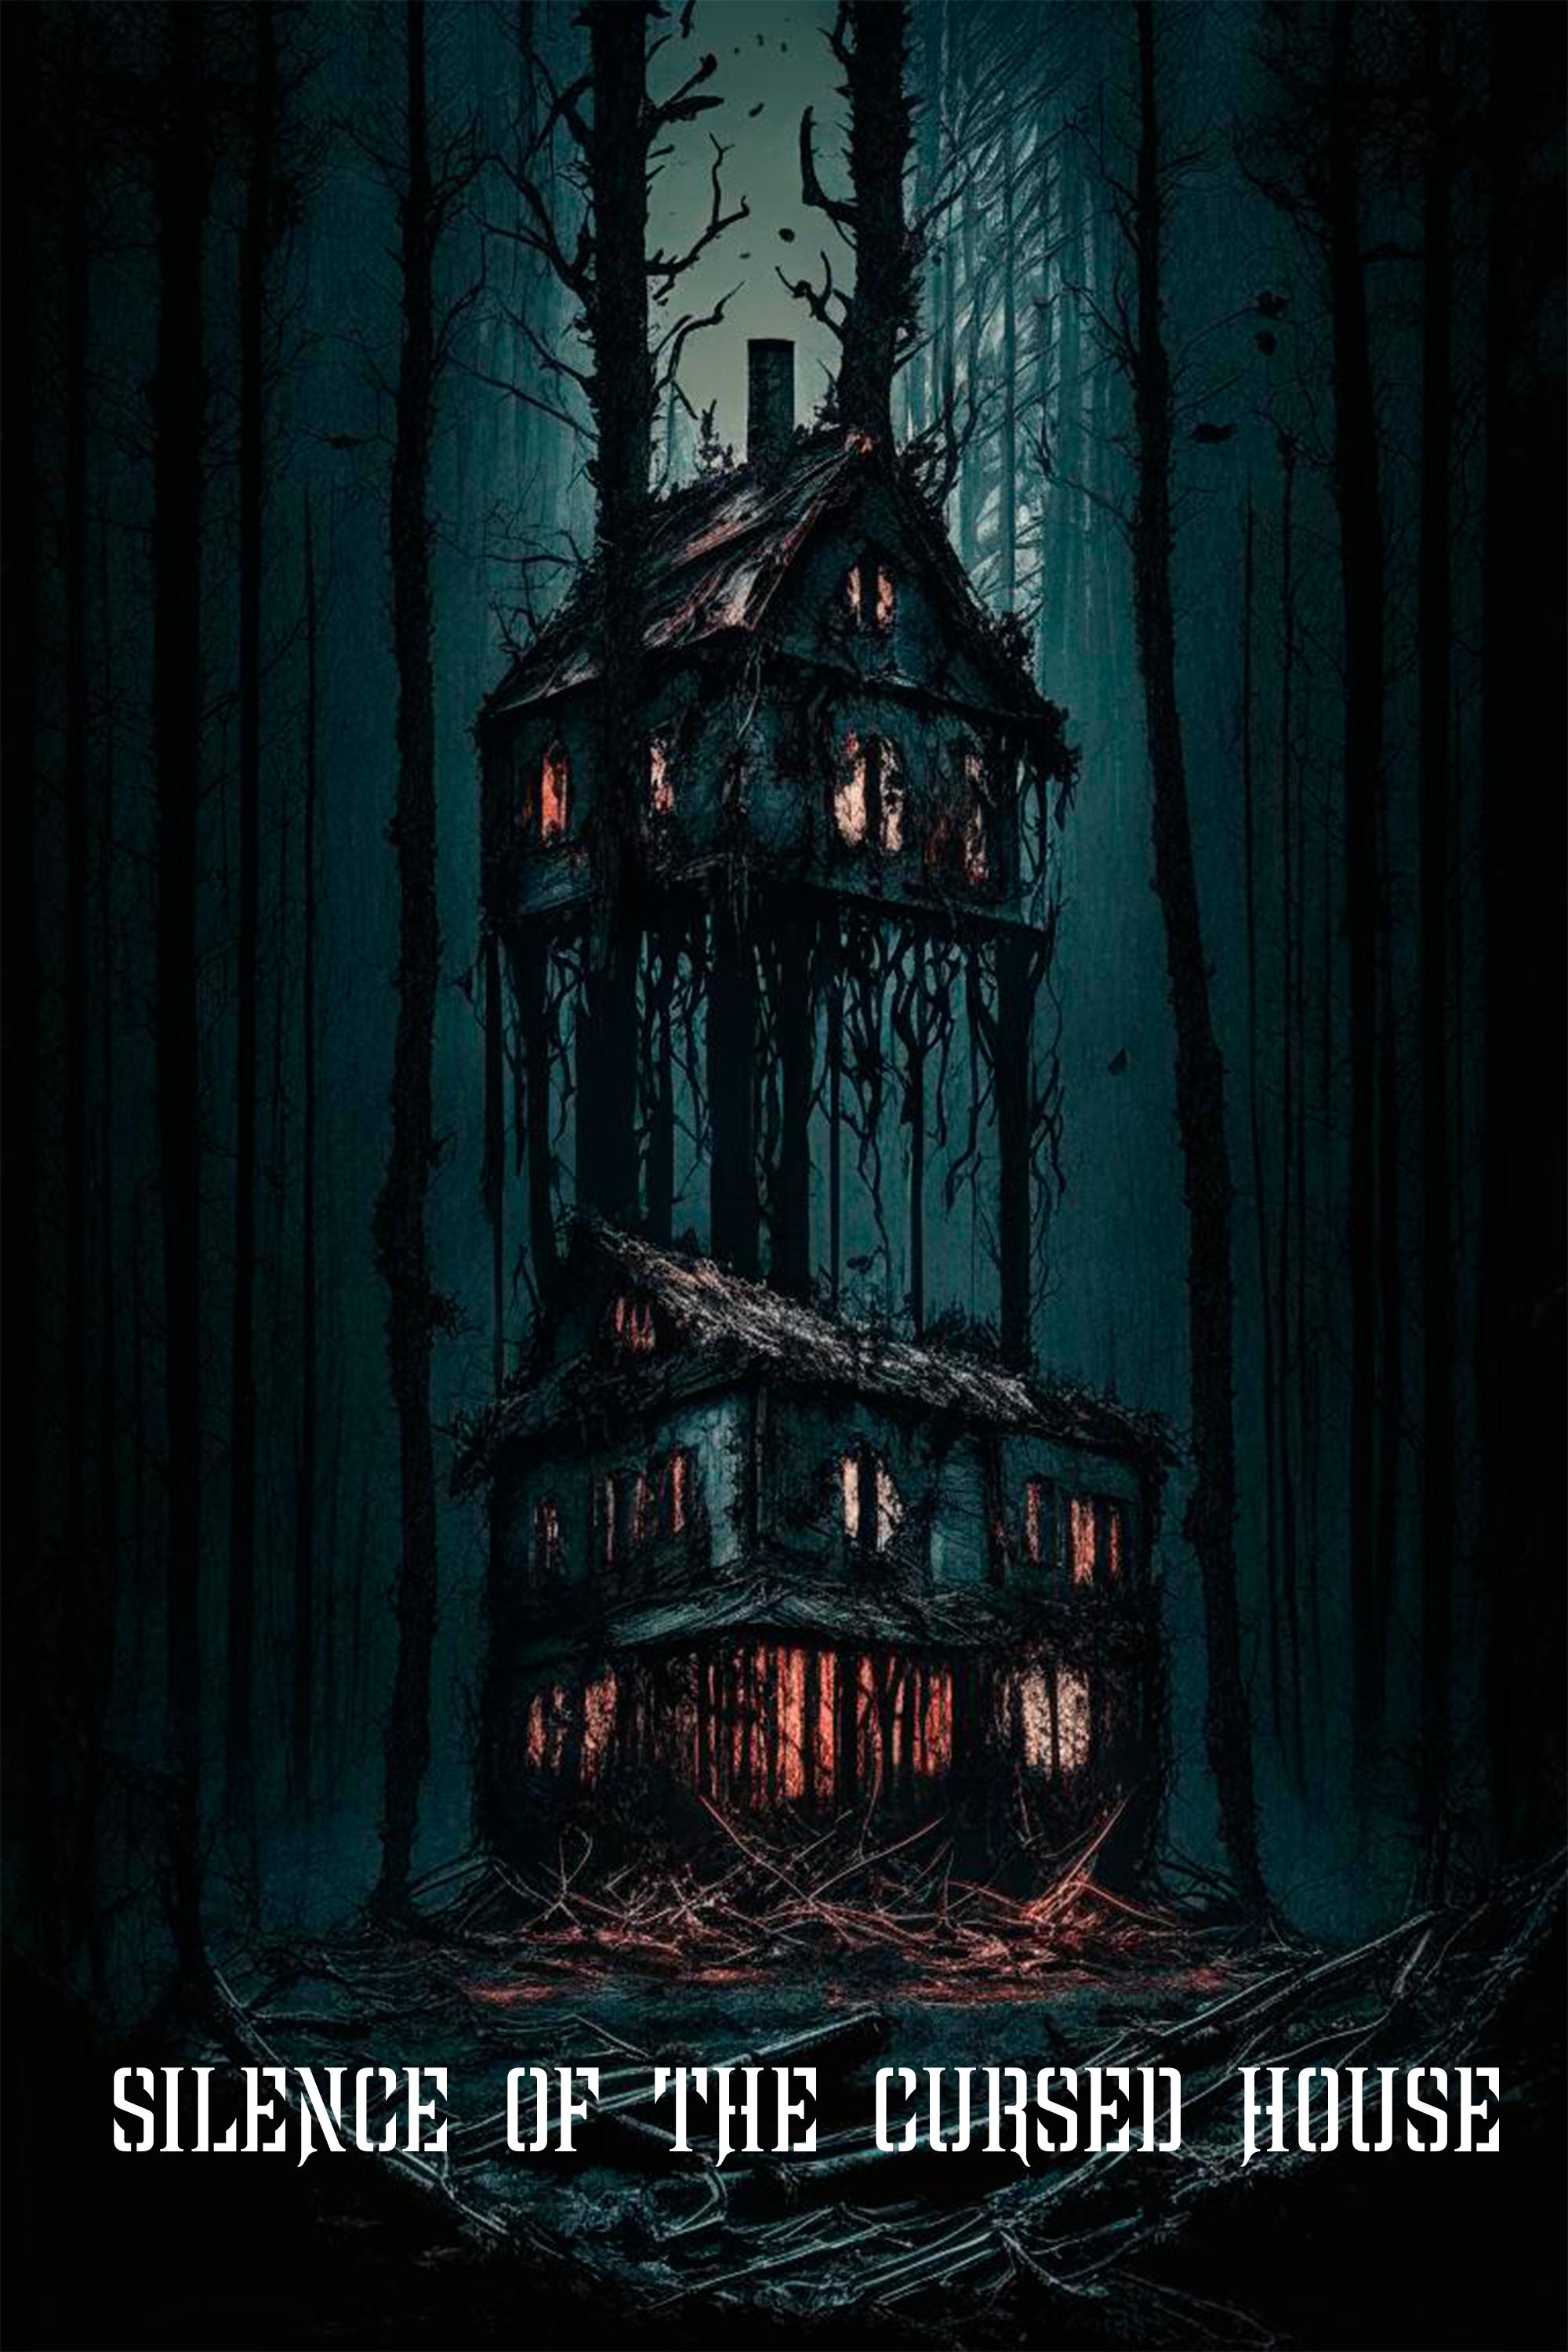 Silence of the cursed house